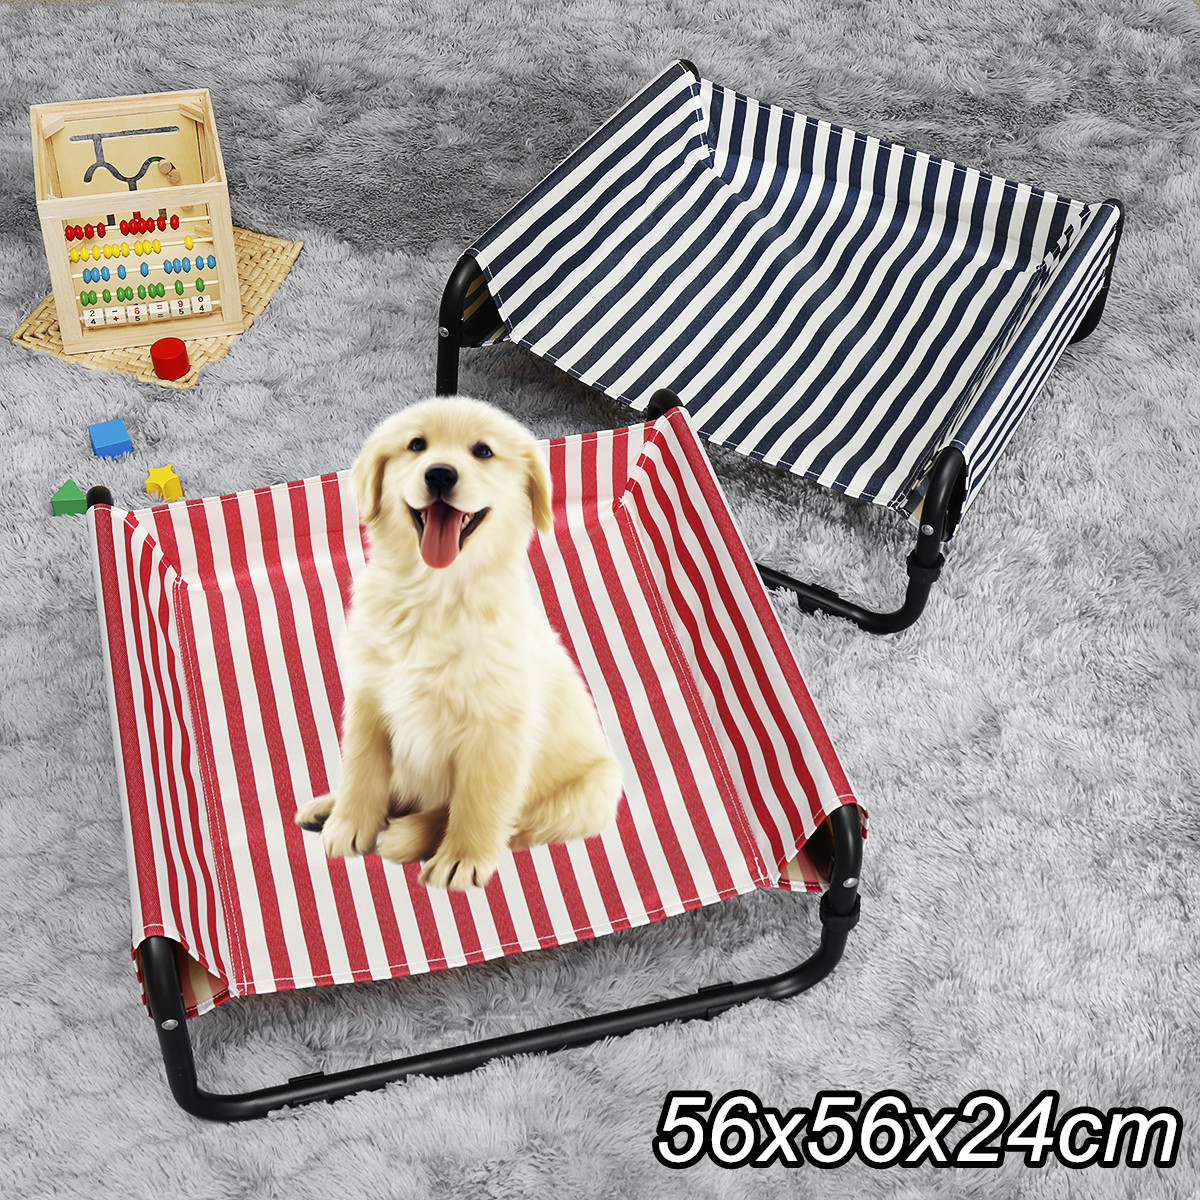 Elevated-Dog-Pet-Bed-Folding-Portable-Waterproof-Outdoor-Raised-Camping-Basket-1631385-2